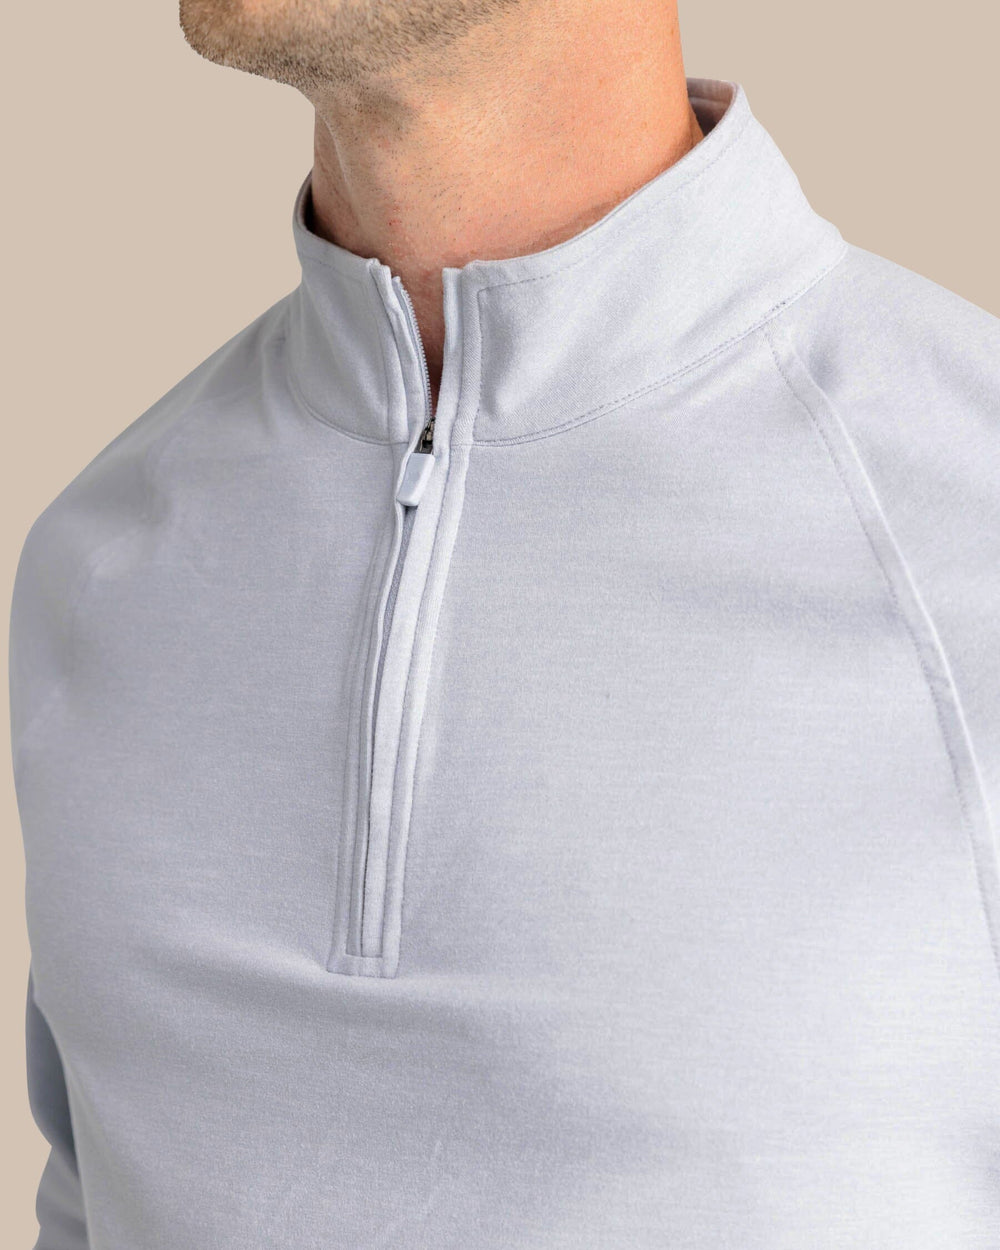 The detail view of the Southern Tide Cruiser Heather Quarter Zip by Southern Tide - Heather Slate Grey